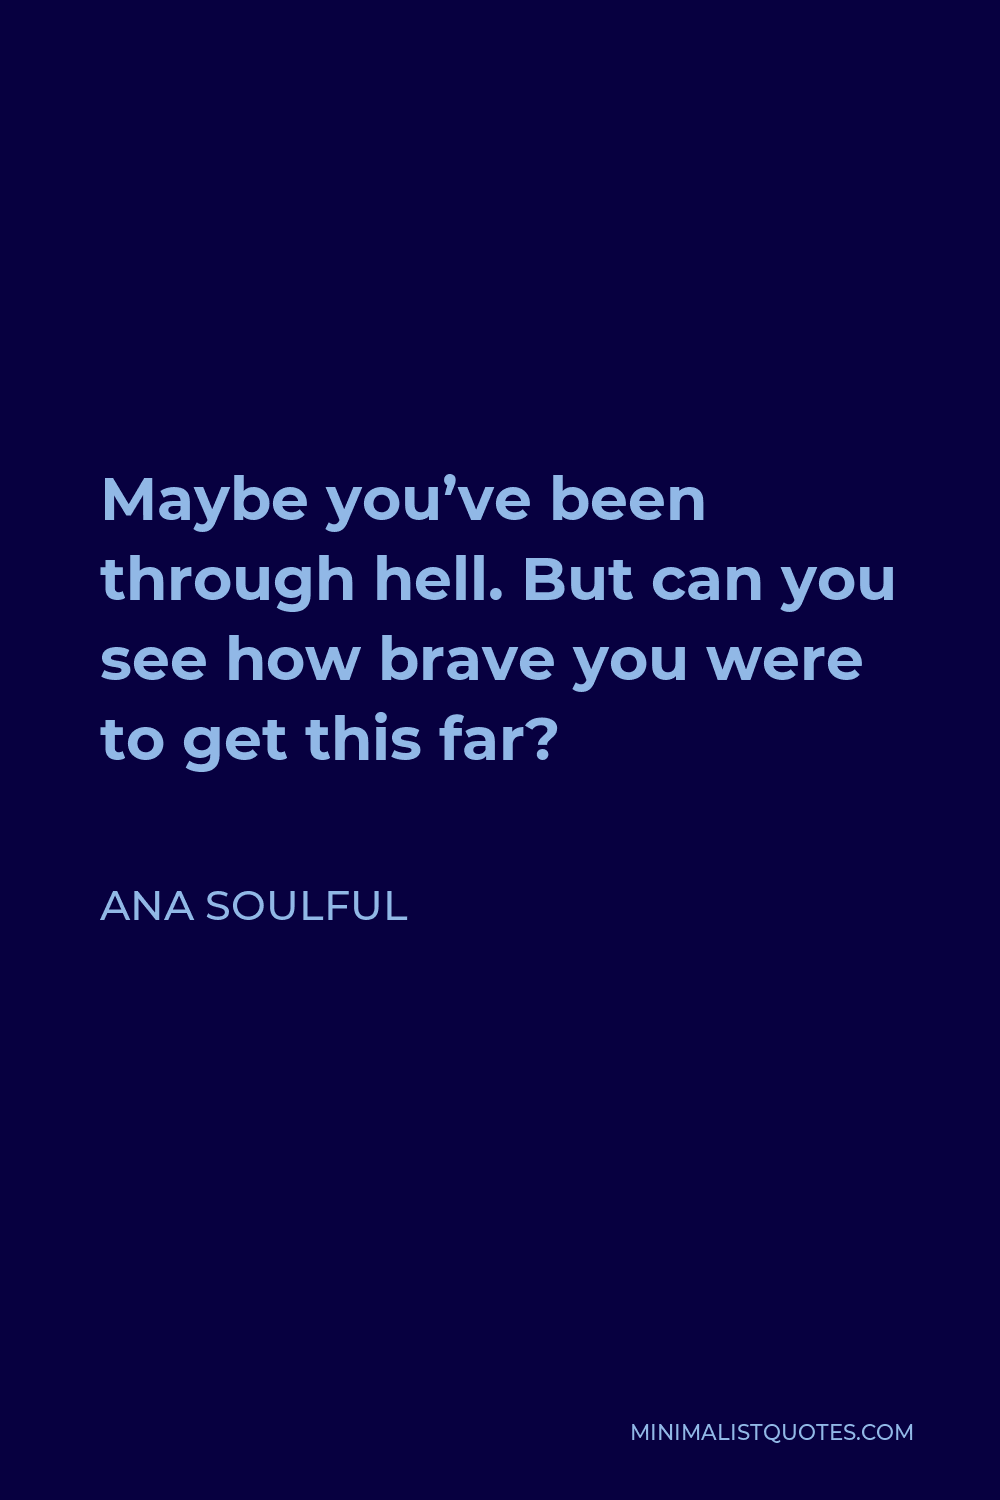 Ana Soulful Quote - Maybe you’ve been through hell. But can you see how brave you were to get this far?